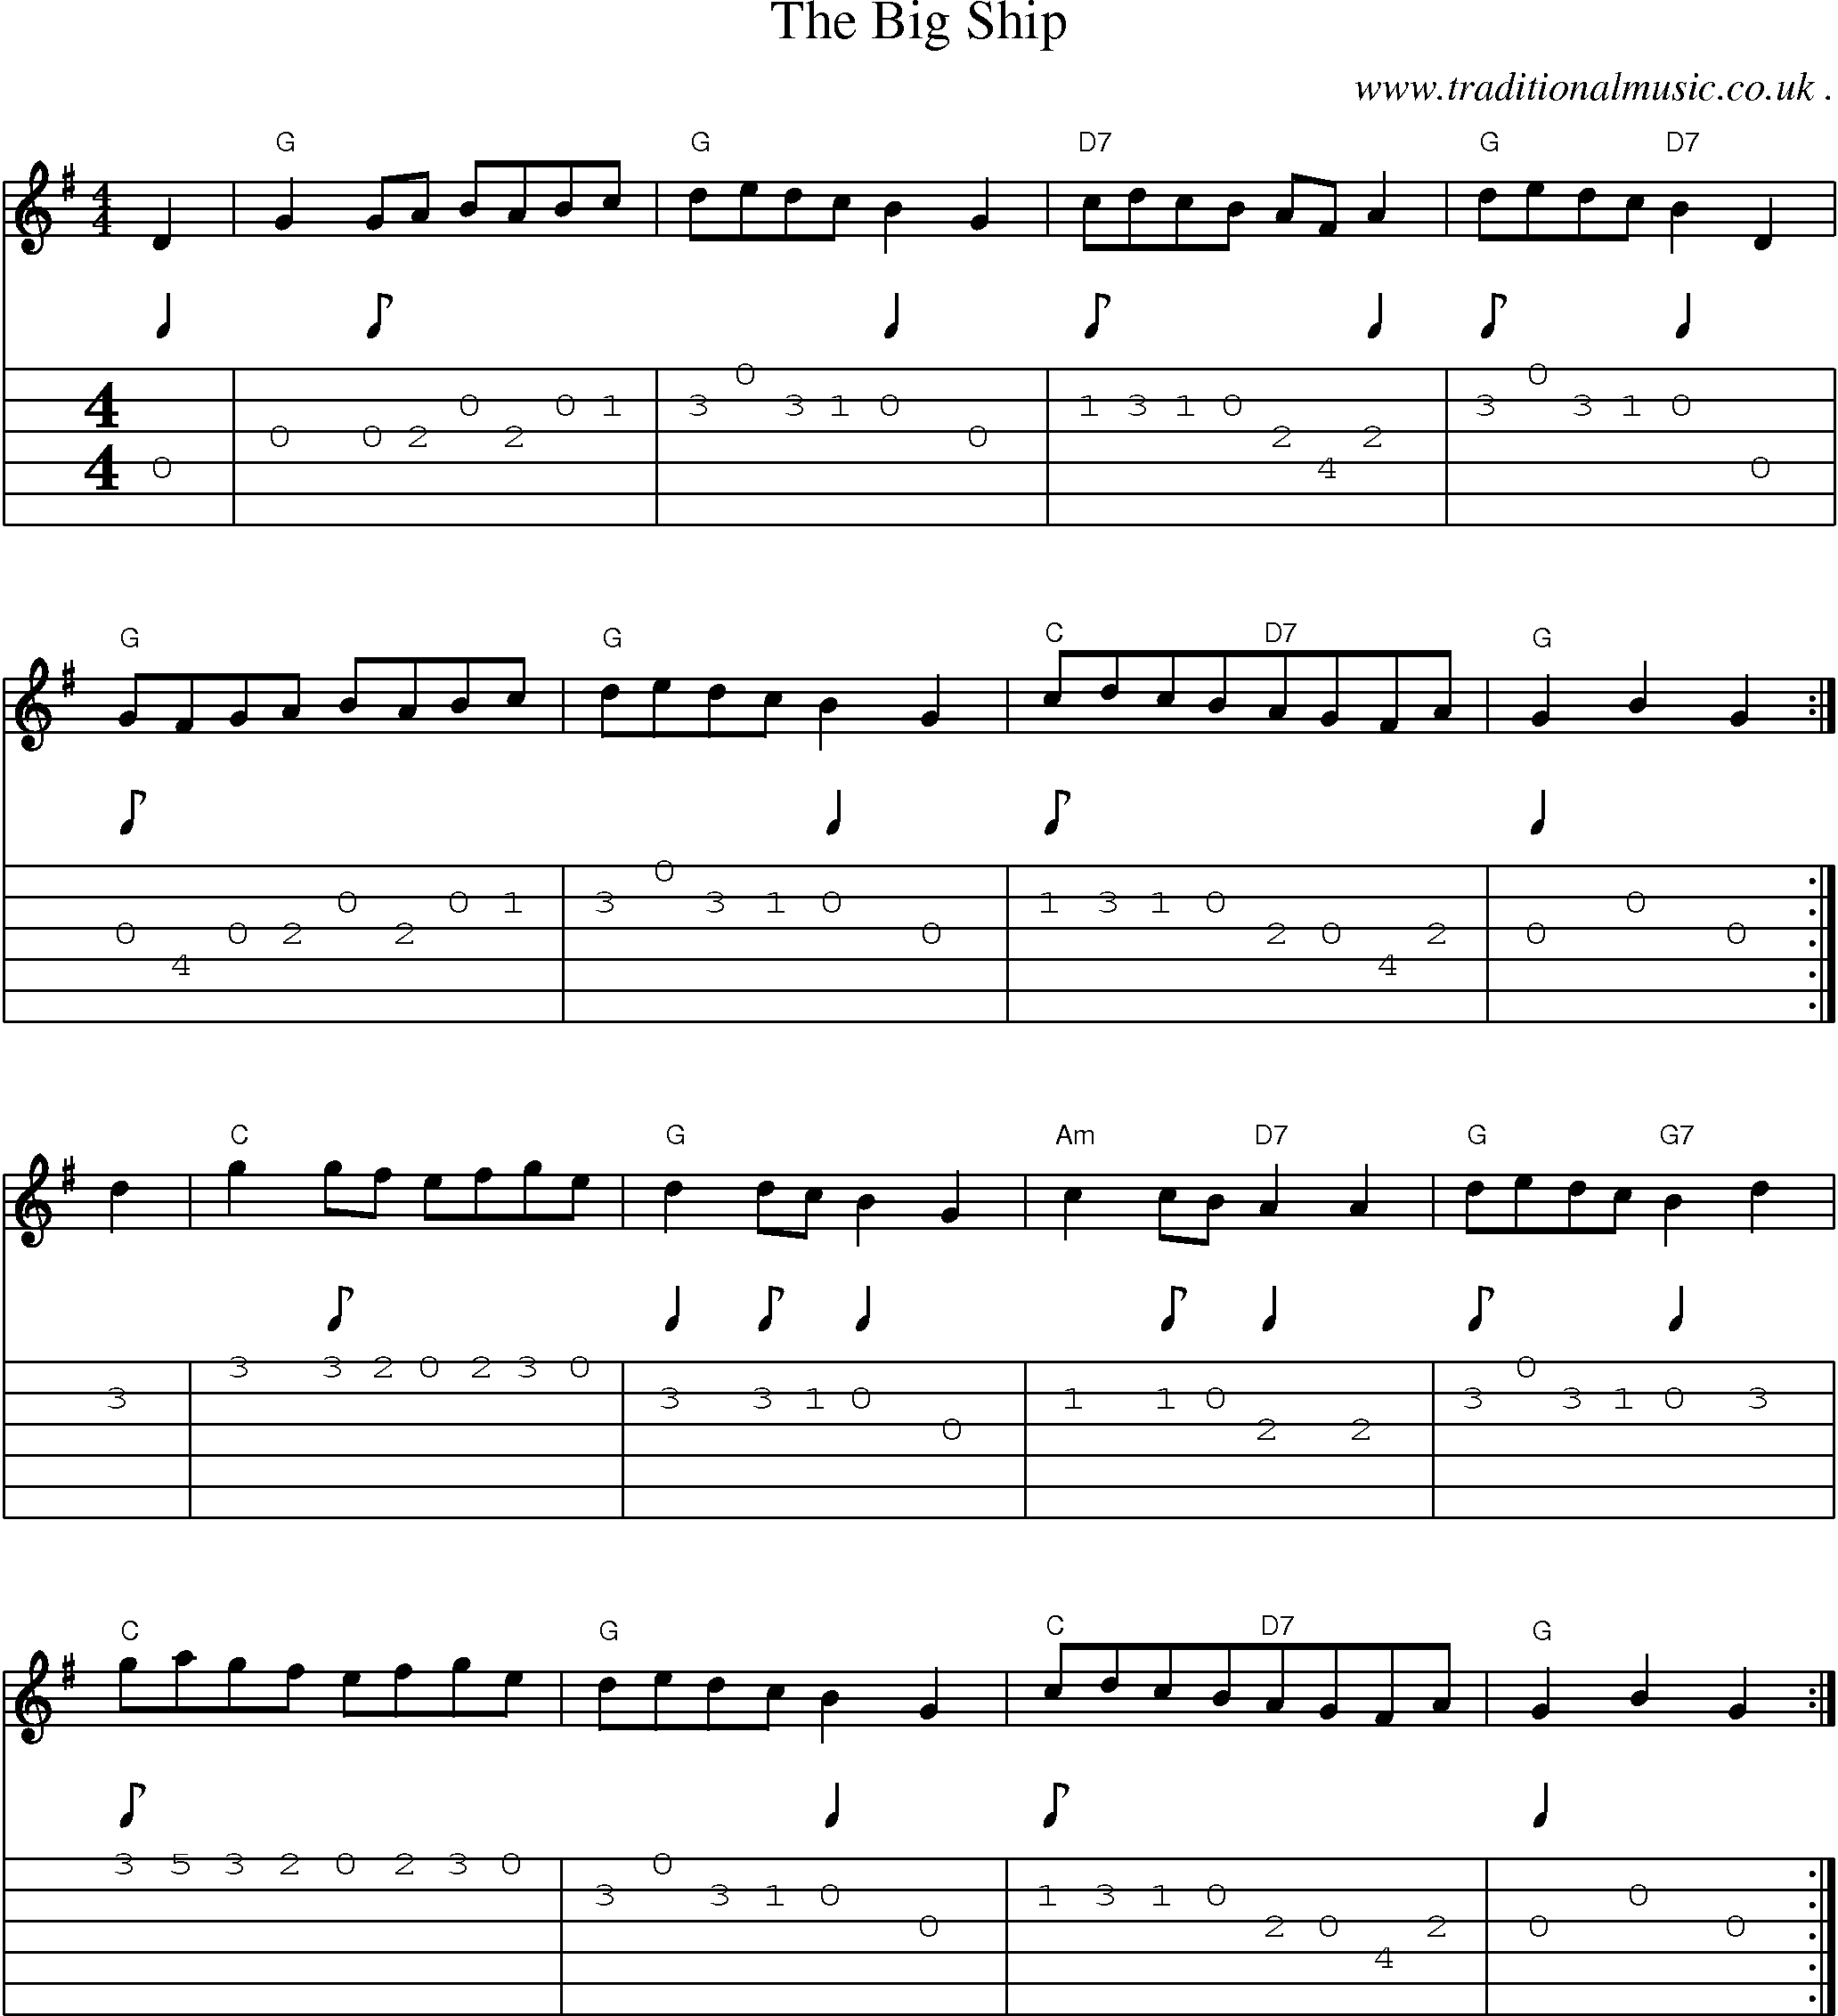 Sheet-Music and Guitar Tabs for The Big Ship